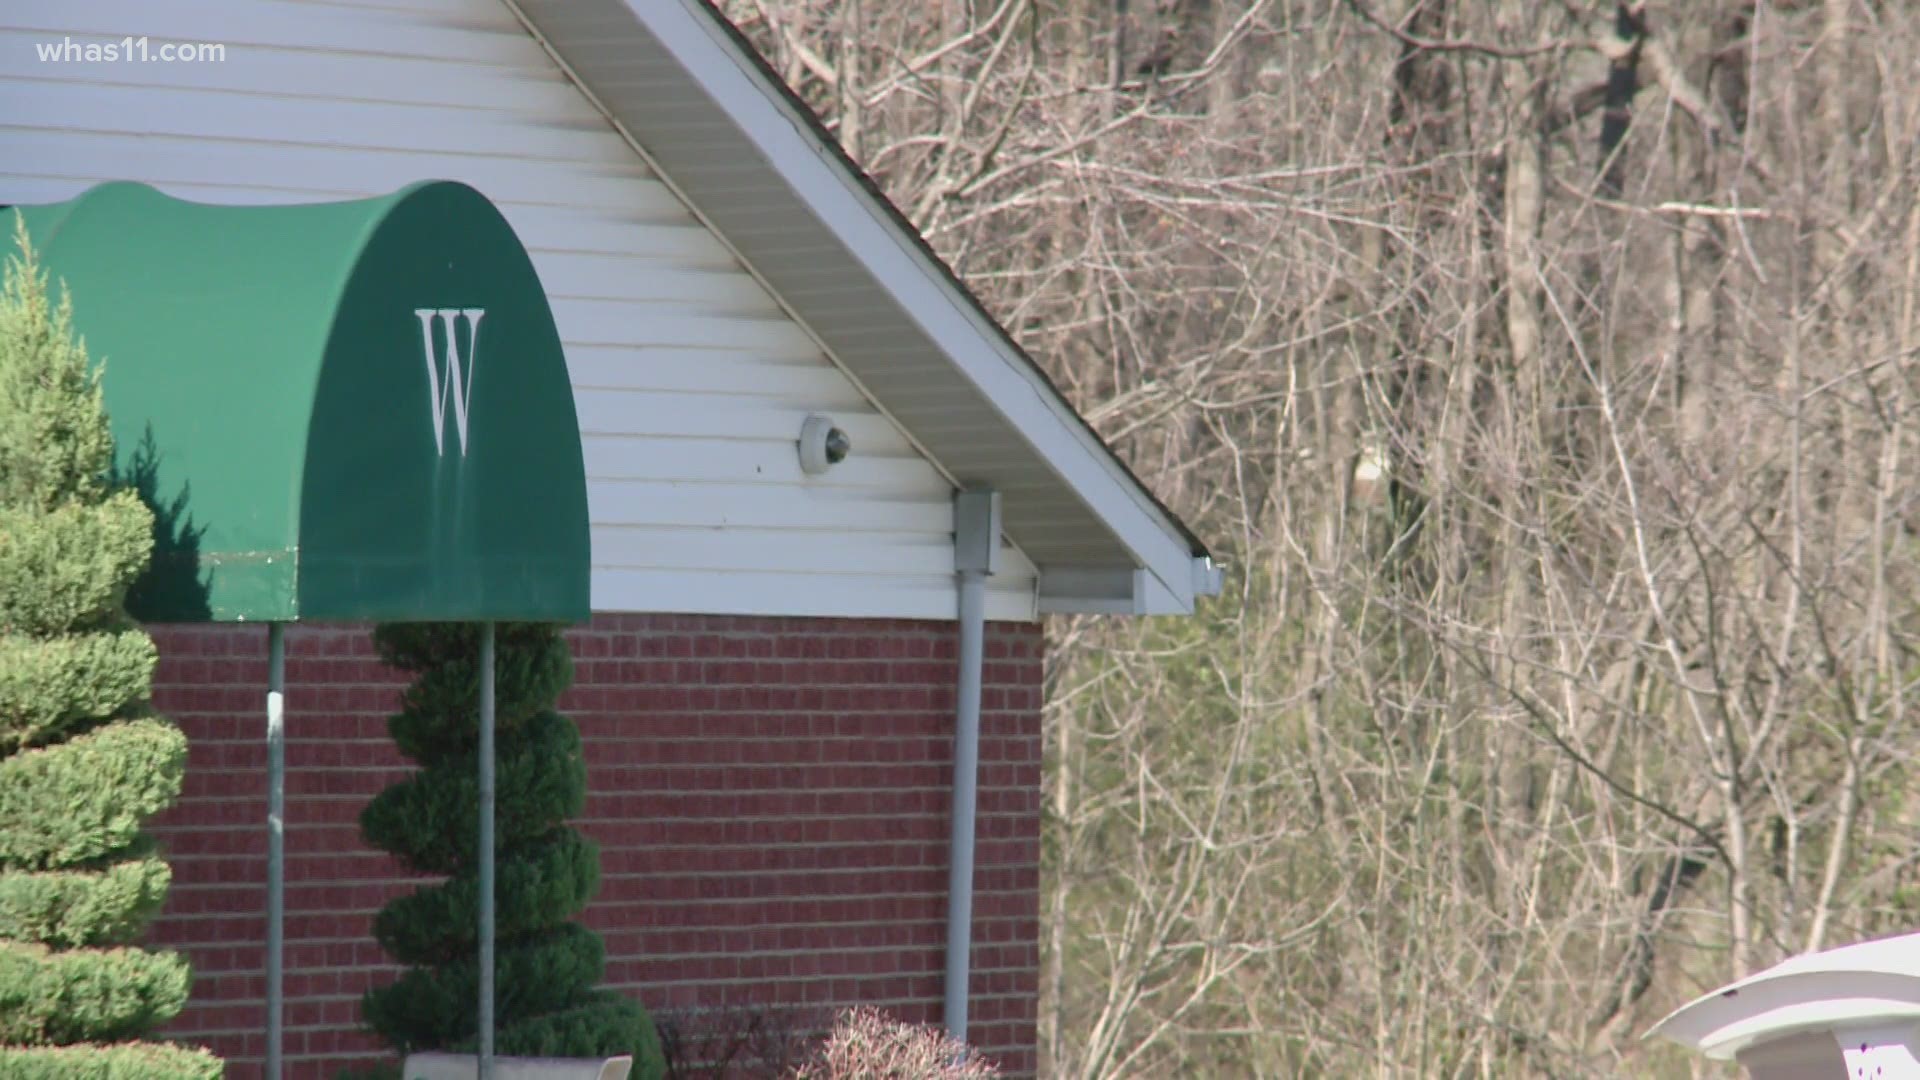 A former nurse in a Clarksville nursing home during COVID-19 has been charged with a felony after removing a patient's oxygen and then posted a message about it.